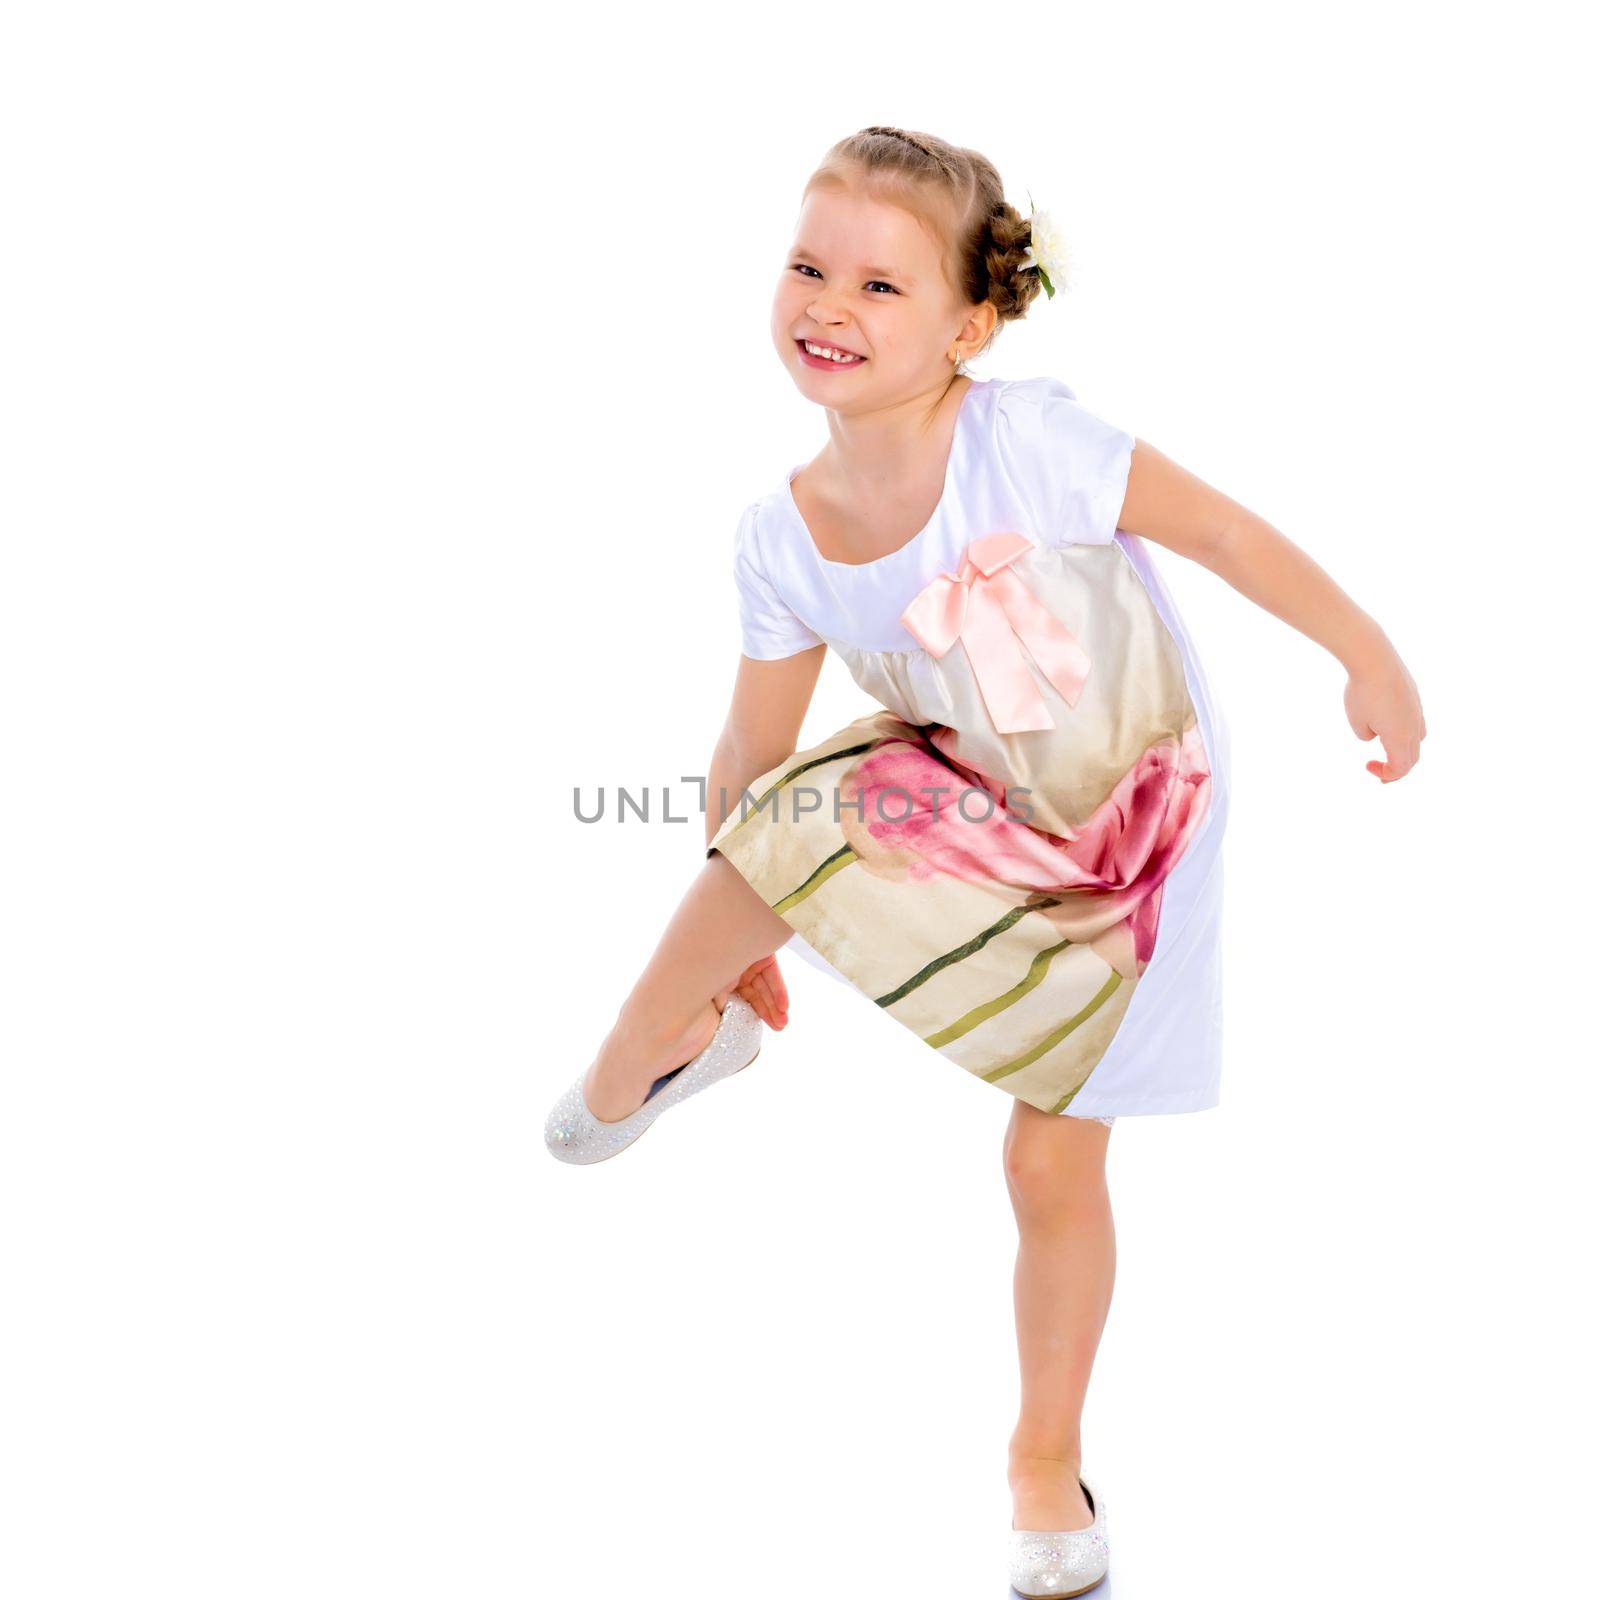 The little girl puts on her shoes. The concept of beauty and fashion, happy childhood. Isolated on white background.